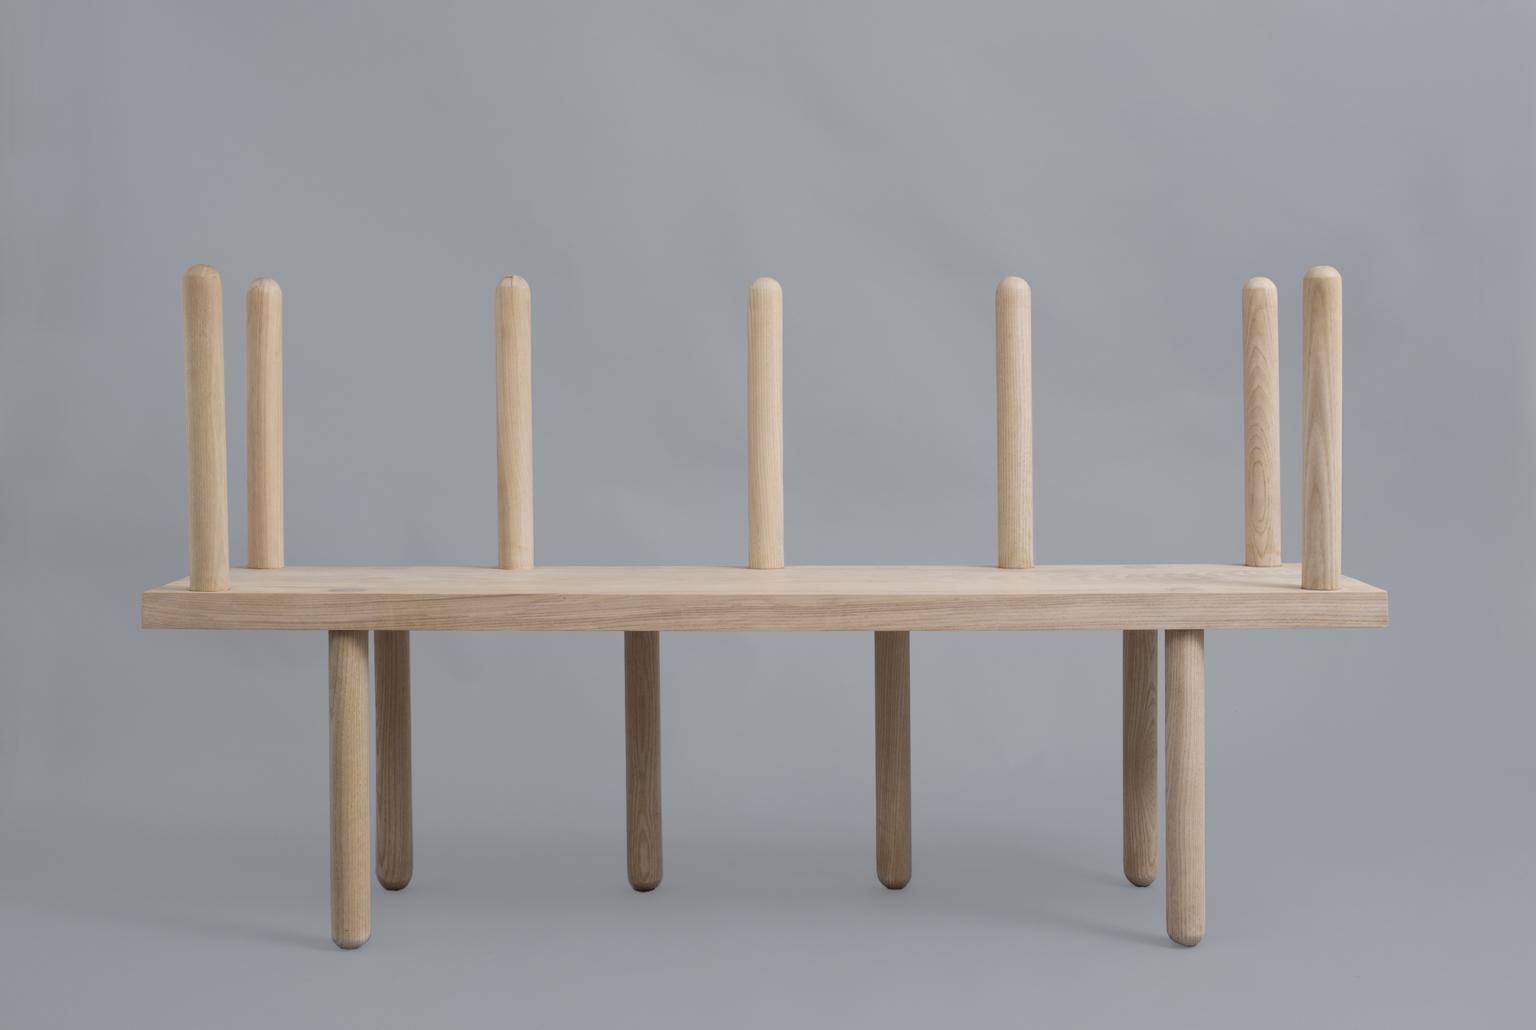 Object No 11 Bench Mos